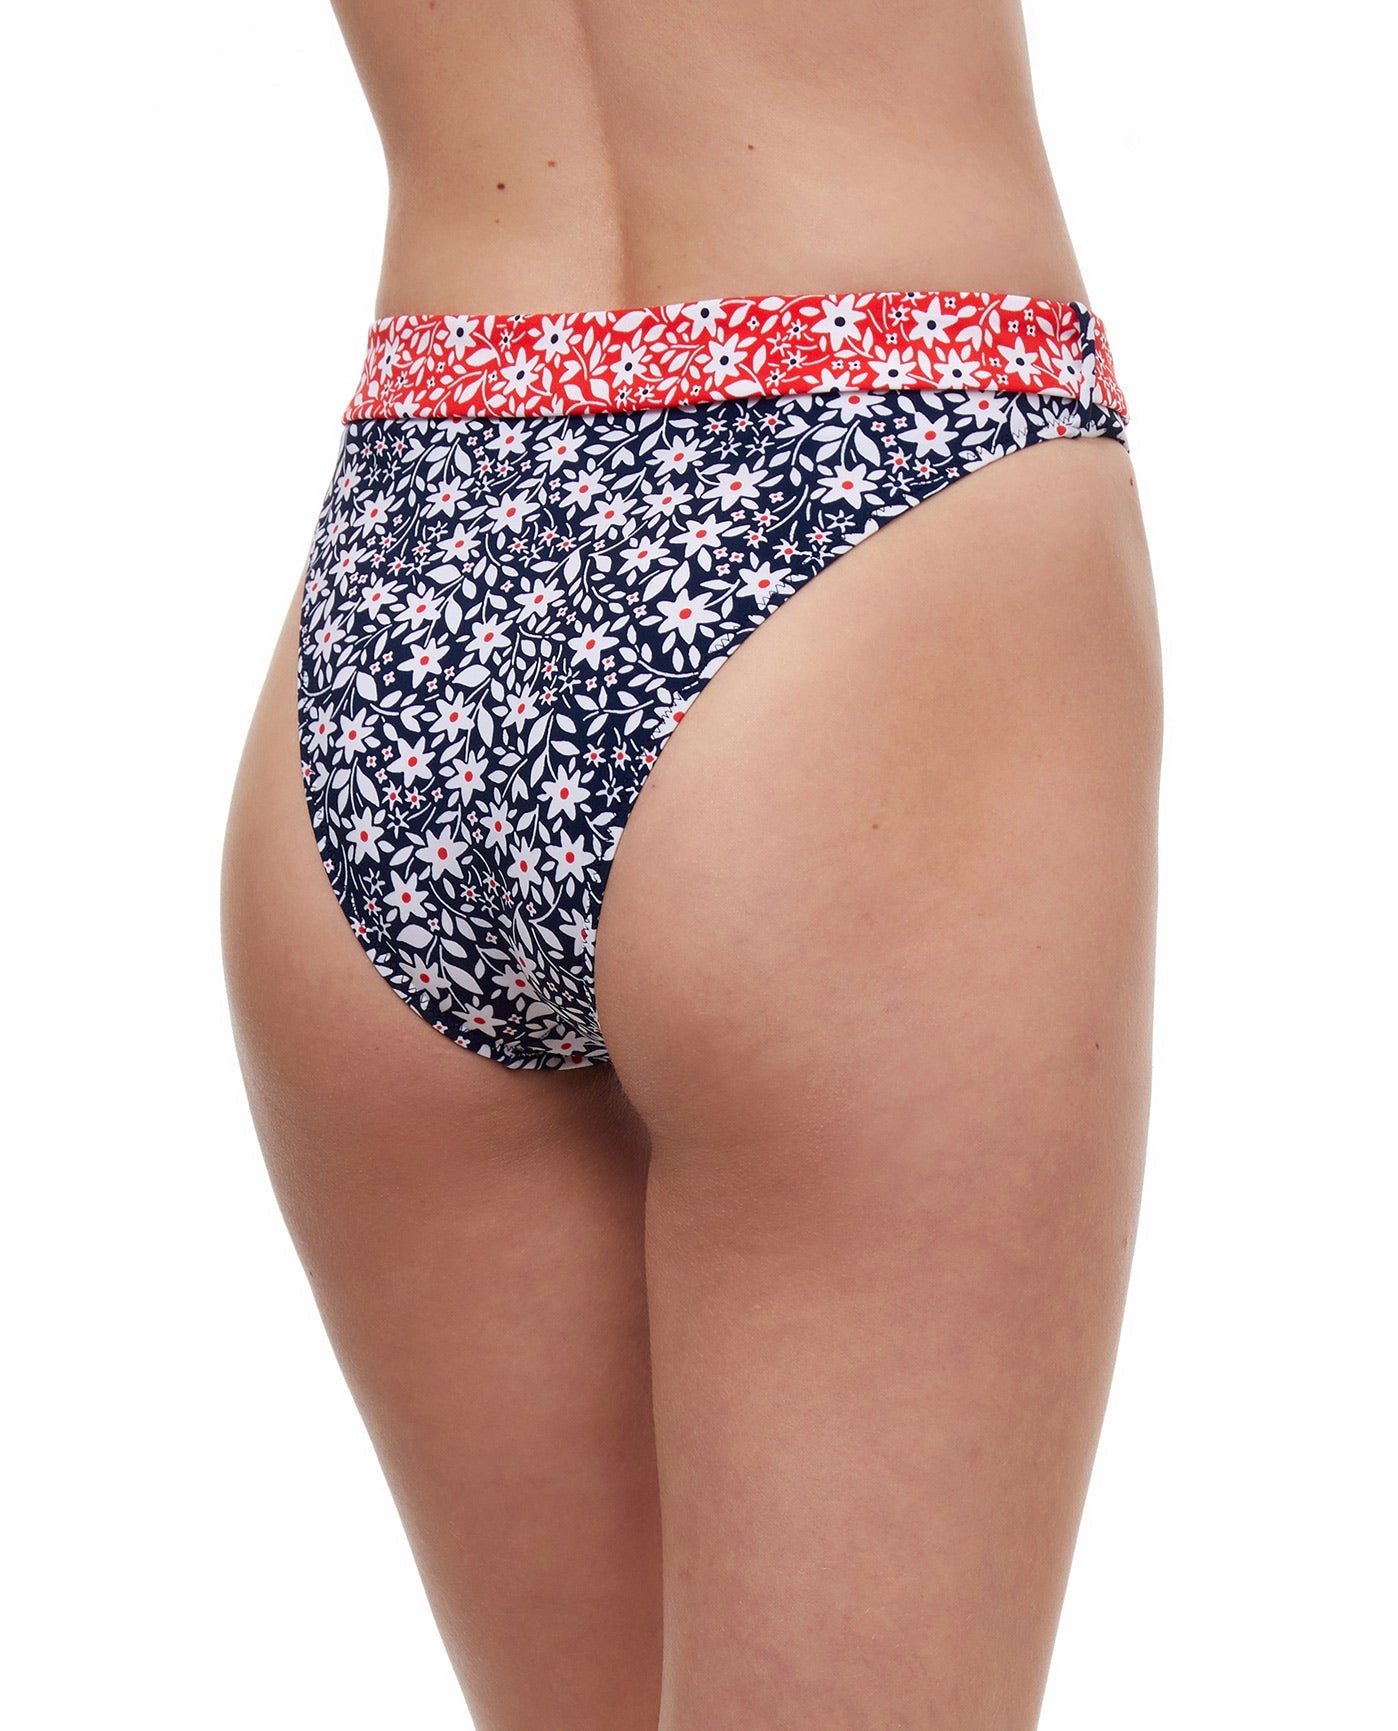 Back View Of Luma Shimmering Daisies High Leg Sexy Bikini Bottom | LUMA SHIMMERING DAISIES NAVY AND RED